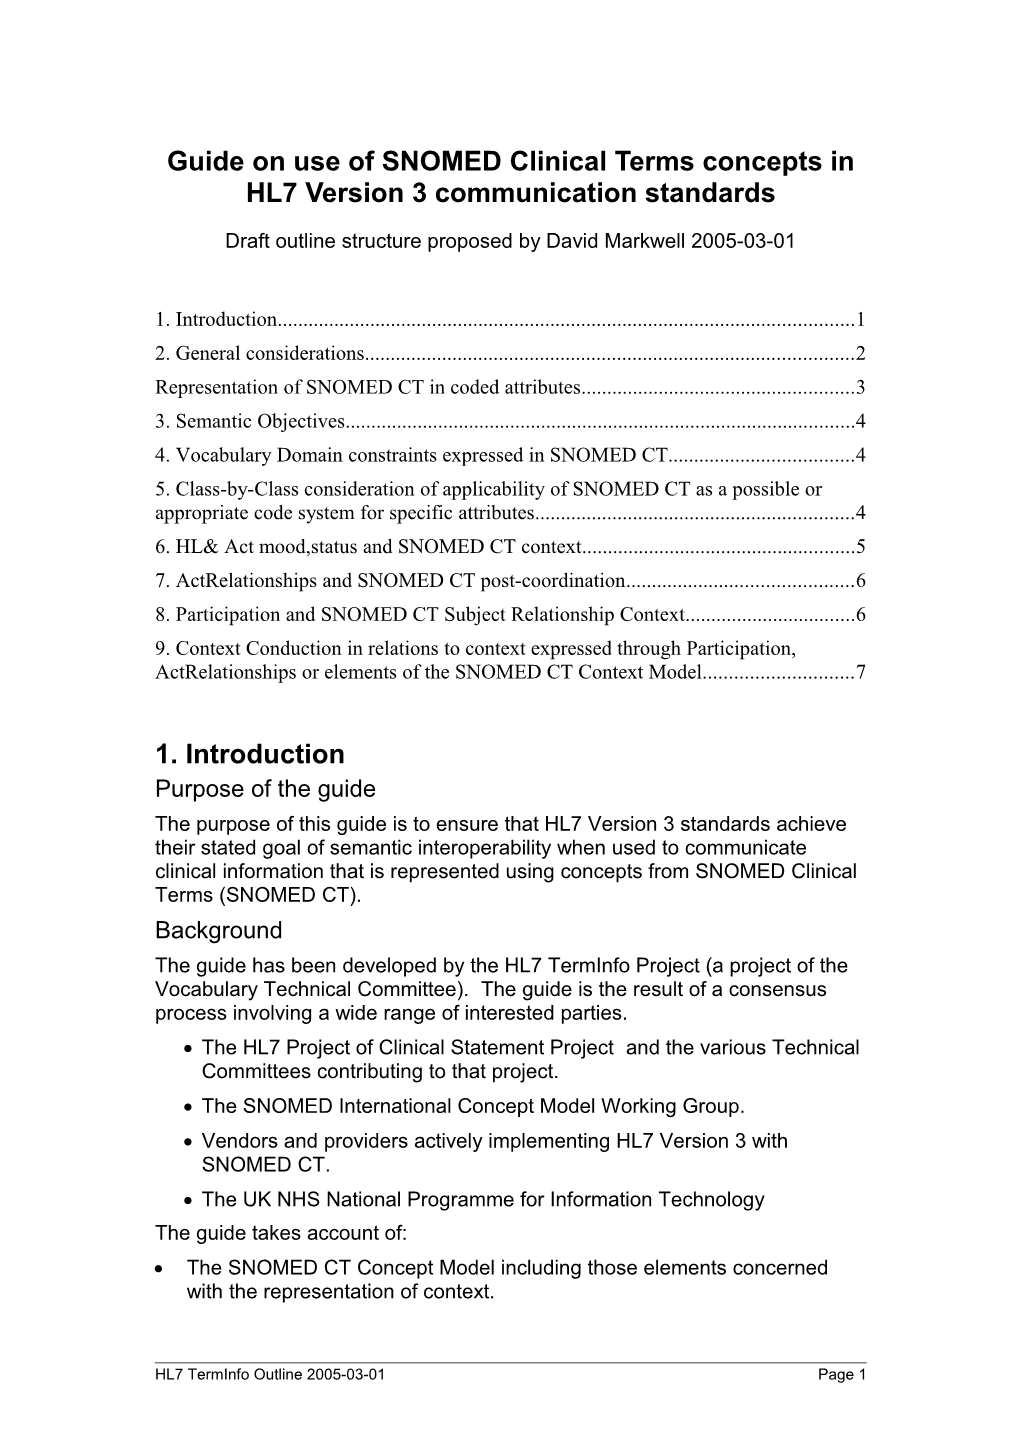 Guide on Use of SNOMED Clinical Terms (SNOMED CT) Concepts in the HL7 Version 3 Communication